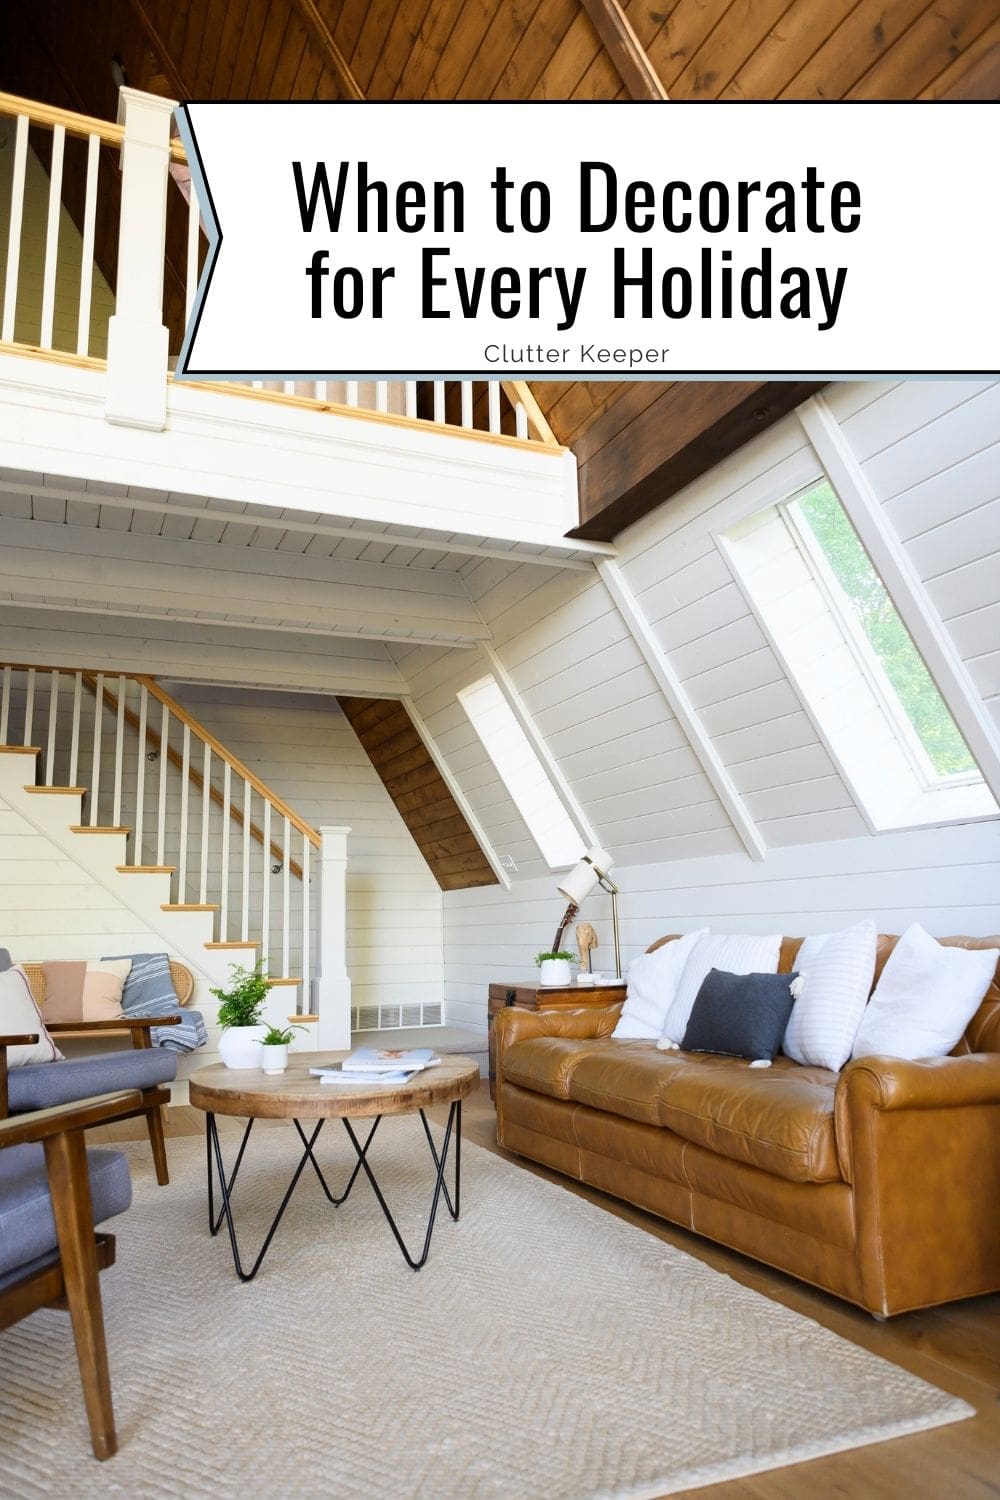 When to decorate for every holiday.